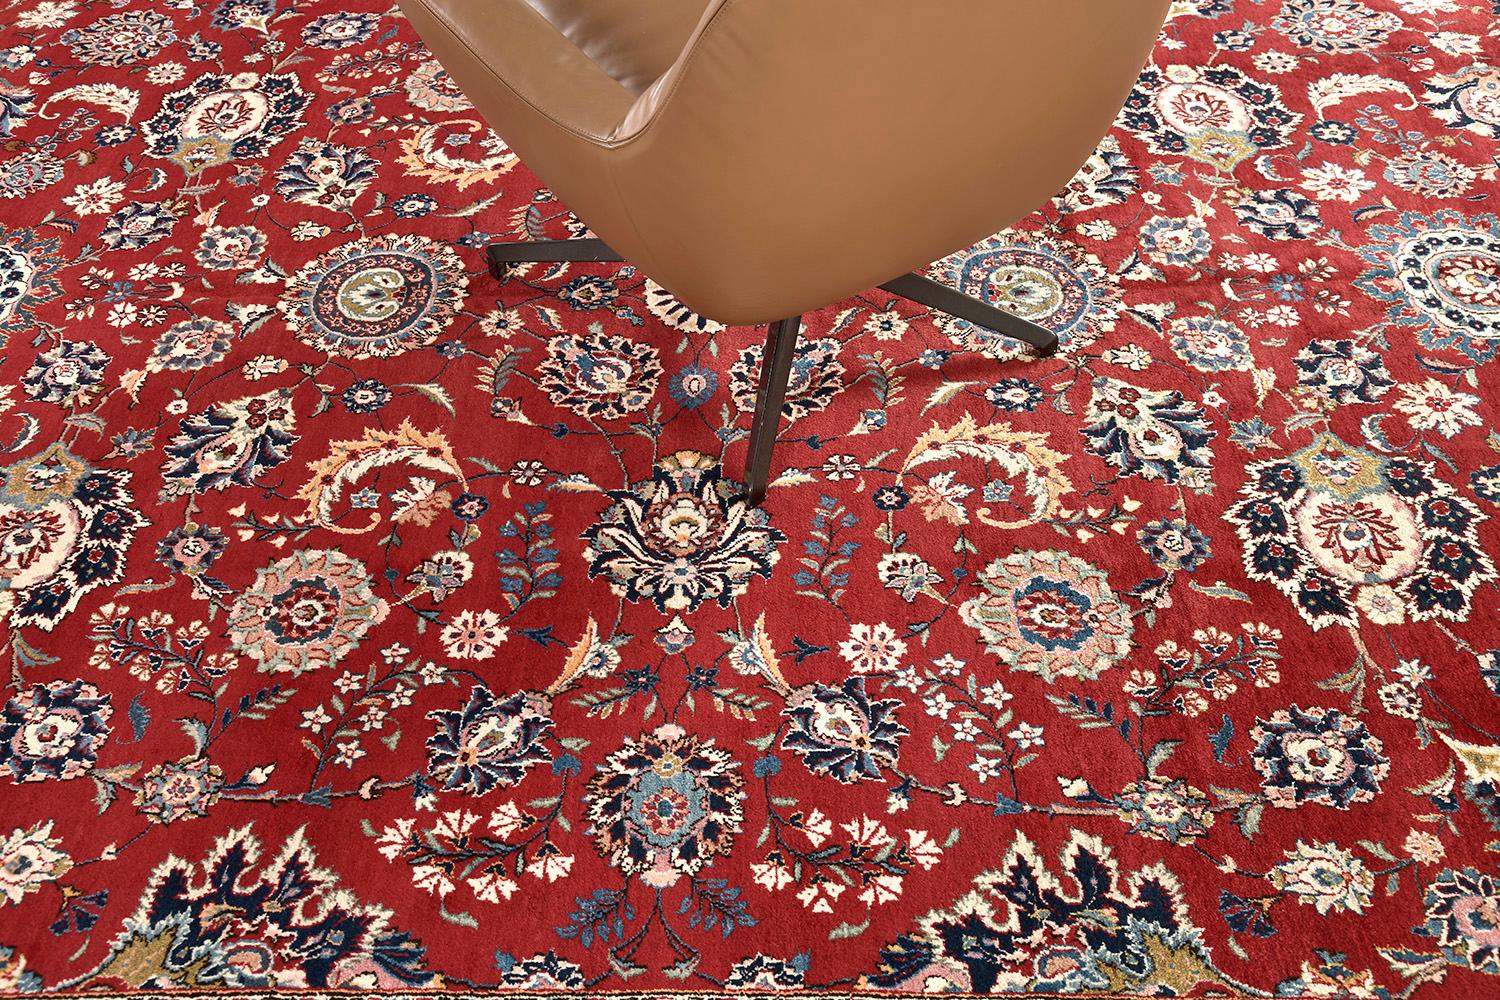 A fabulous masterpiece of Kashan rug that features a penny-worth impact from its every design. At its core, majestically presents a detailed floral theme and leafy scrolls. An effortless combination of various symmetrical symbolic motifs is in the